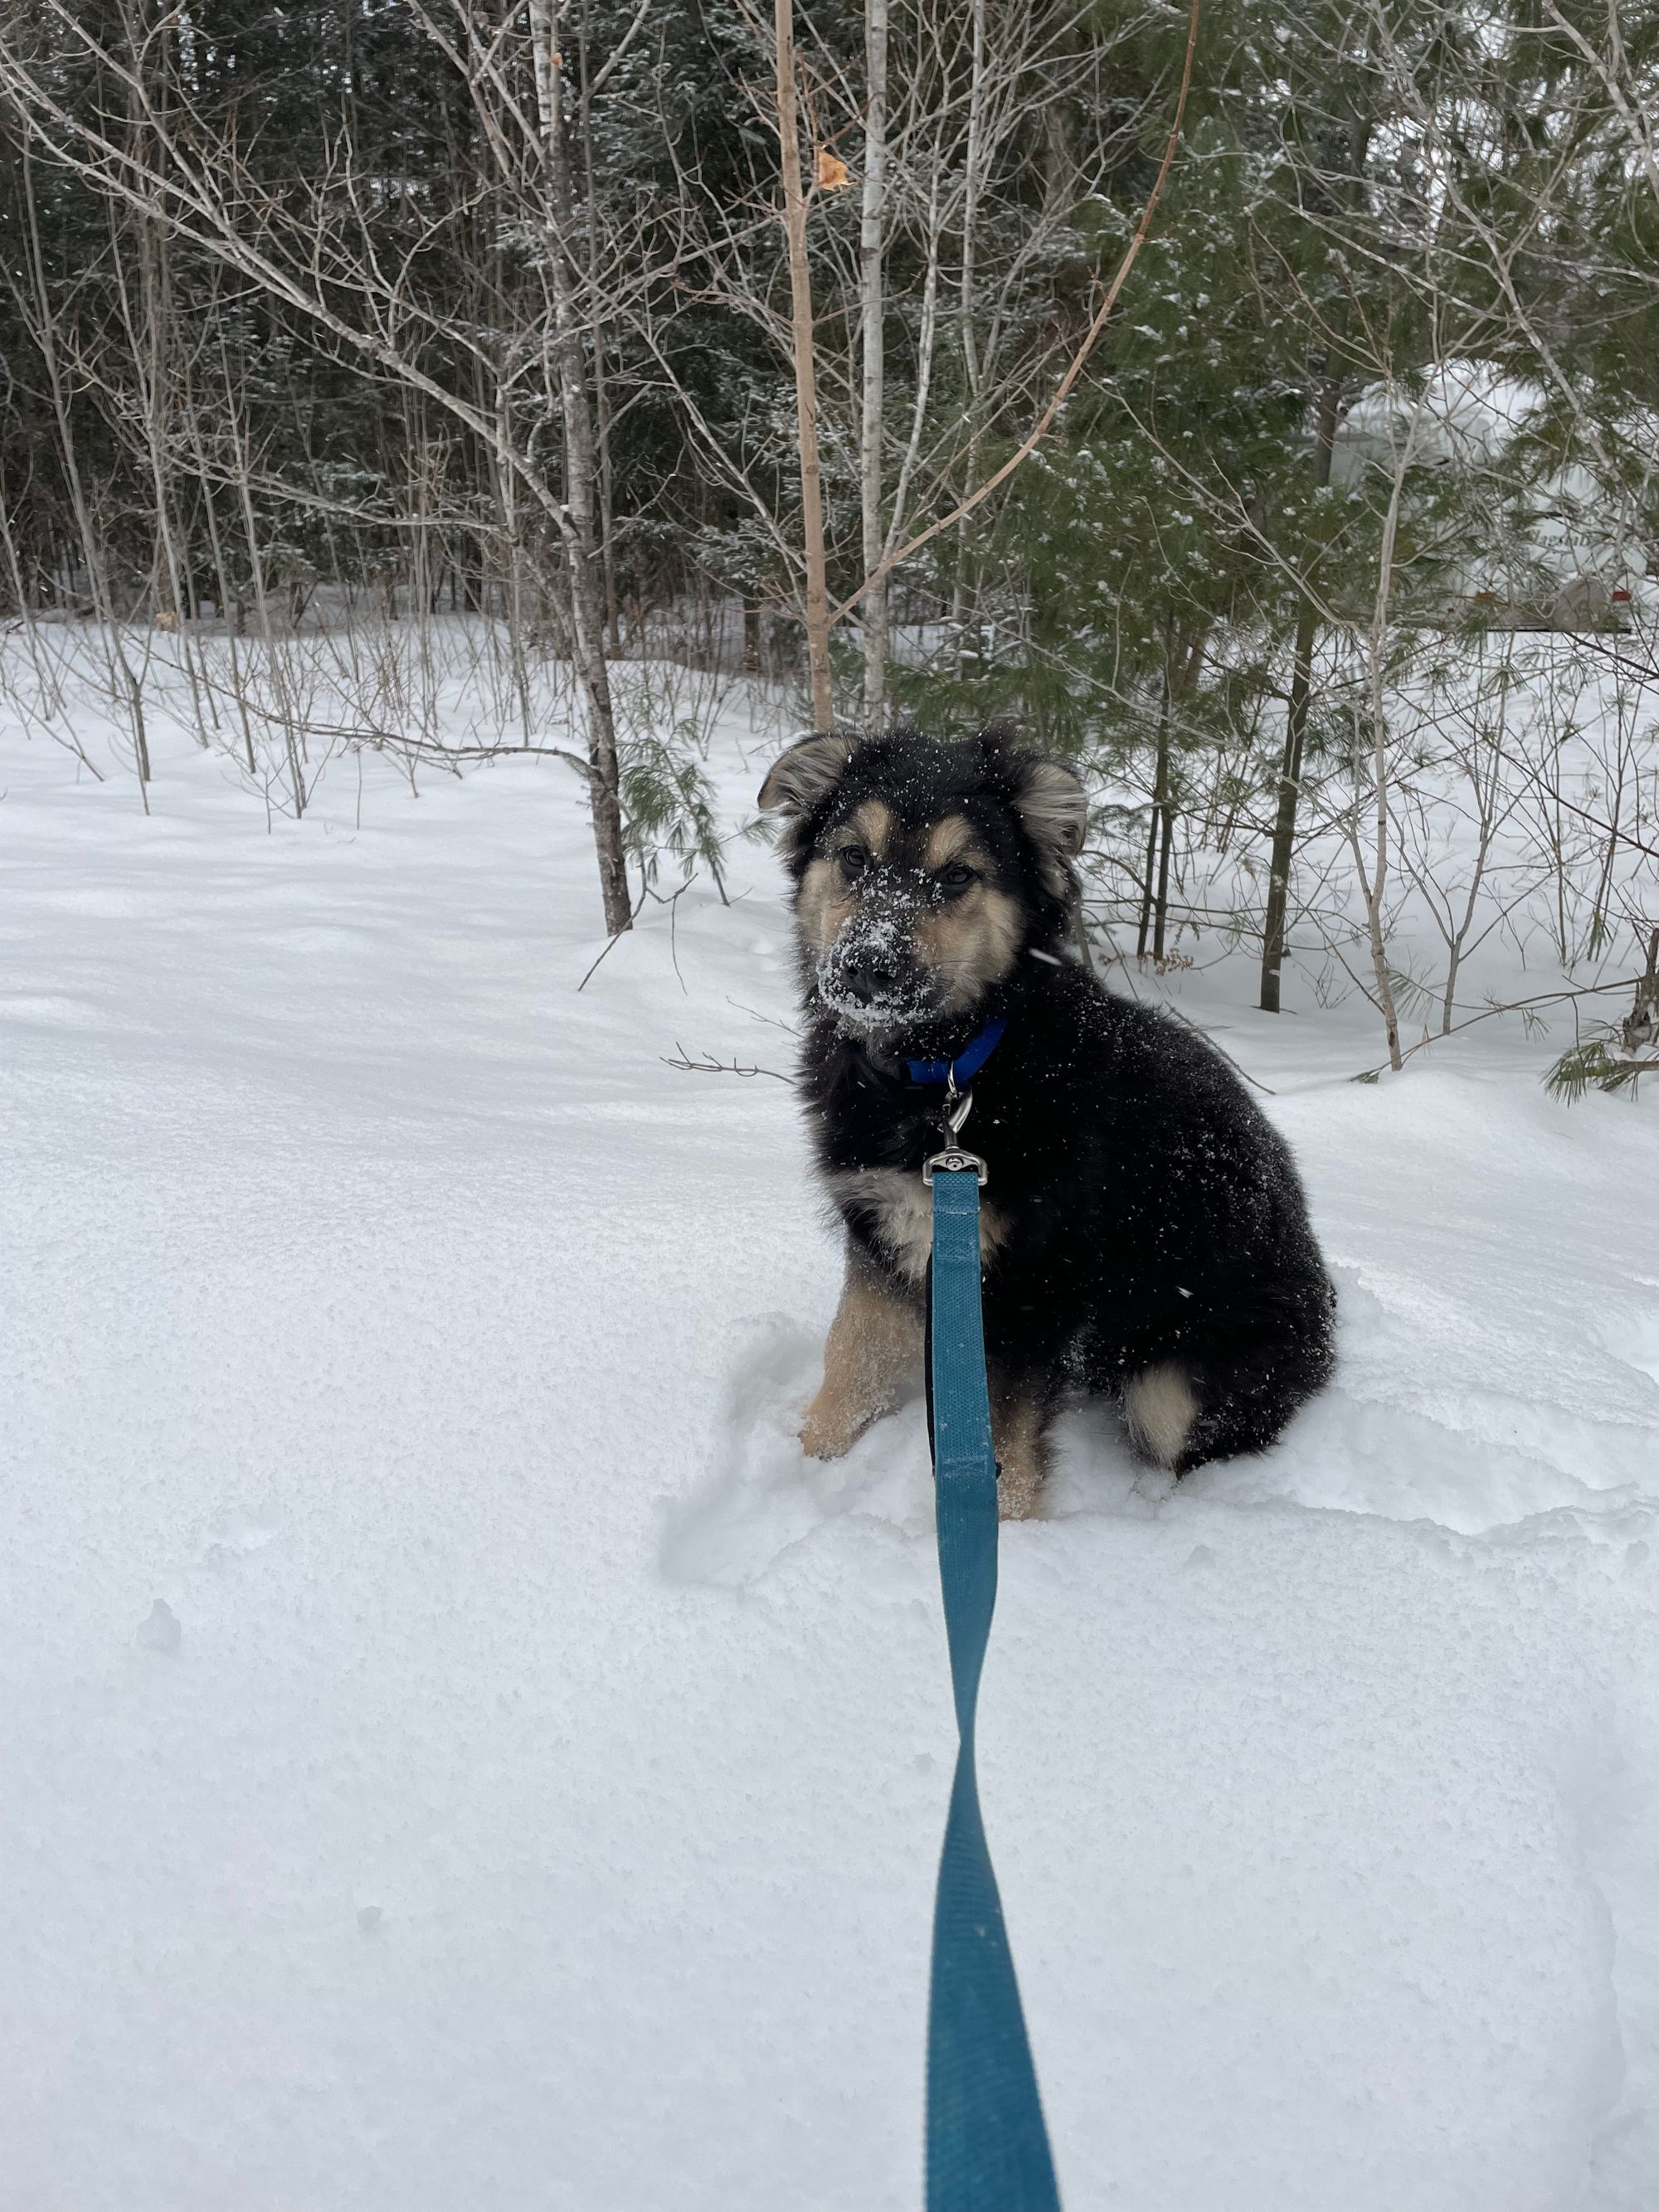 A fluffy puppy with a black coat, tan eyebrows, cheeks and legs. He sits in a snowy landscape with snow on his adorable perfect nose from digging into the snowbanks. He wears a blue collar attached to a blue leash. 